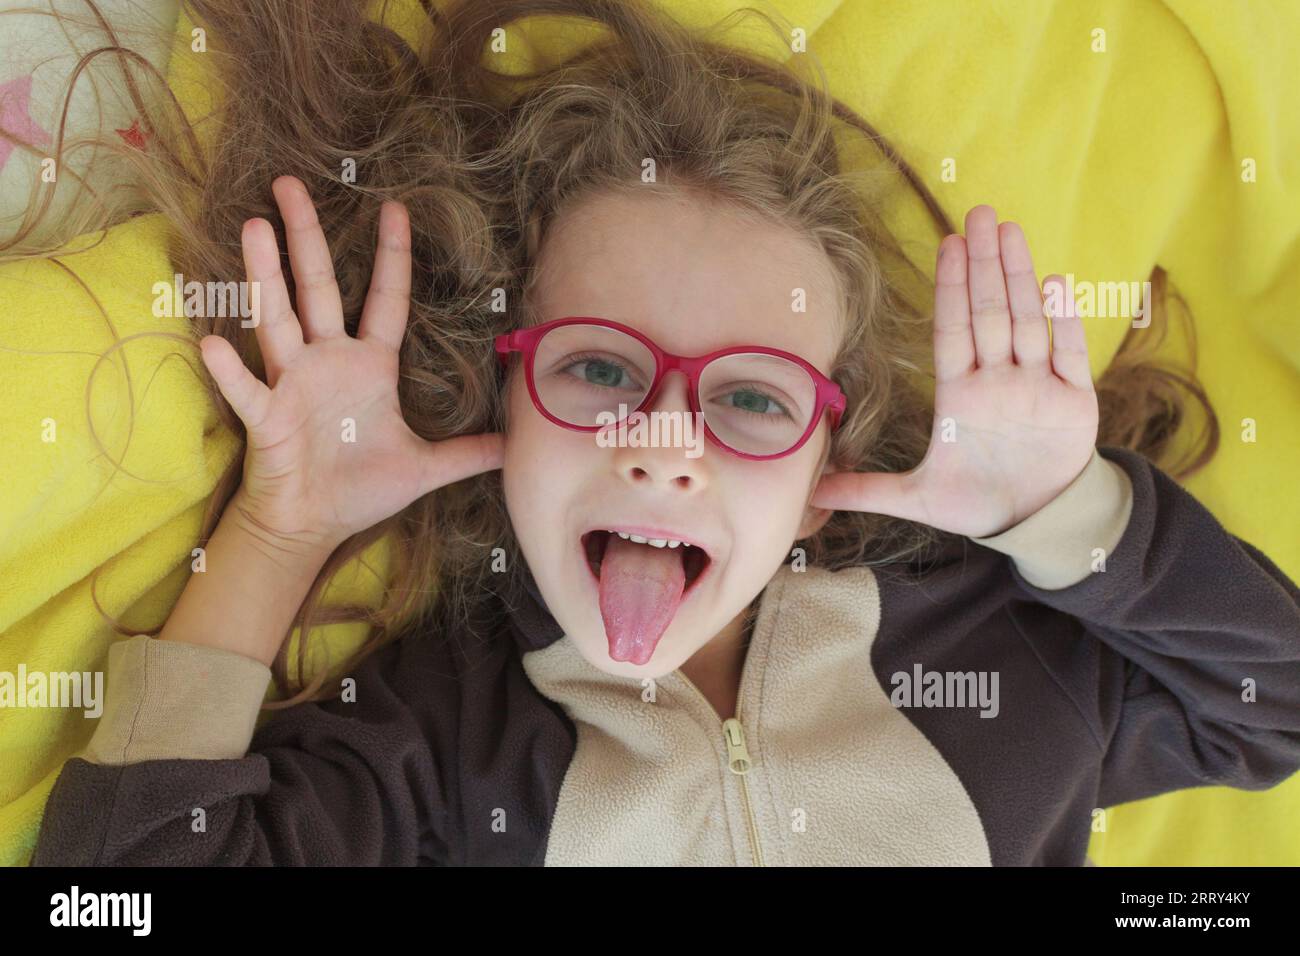 A cheerful girl in glasses makes faces, teases and shows her tongue with her hands in the form of ears, close-up. Stock Photo